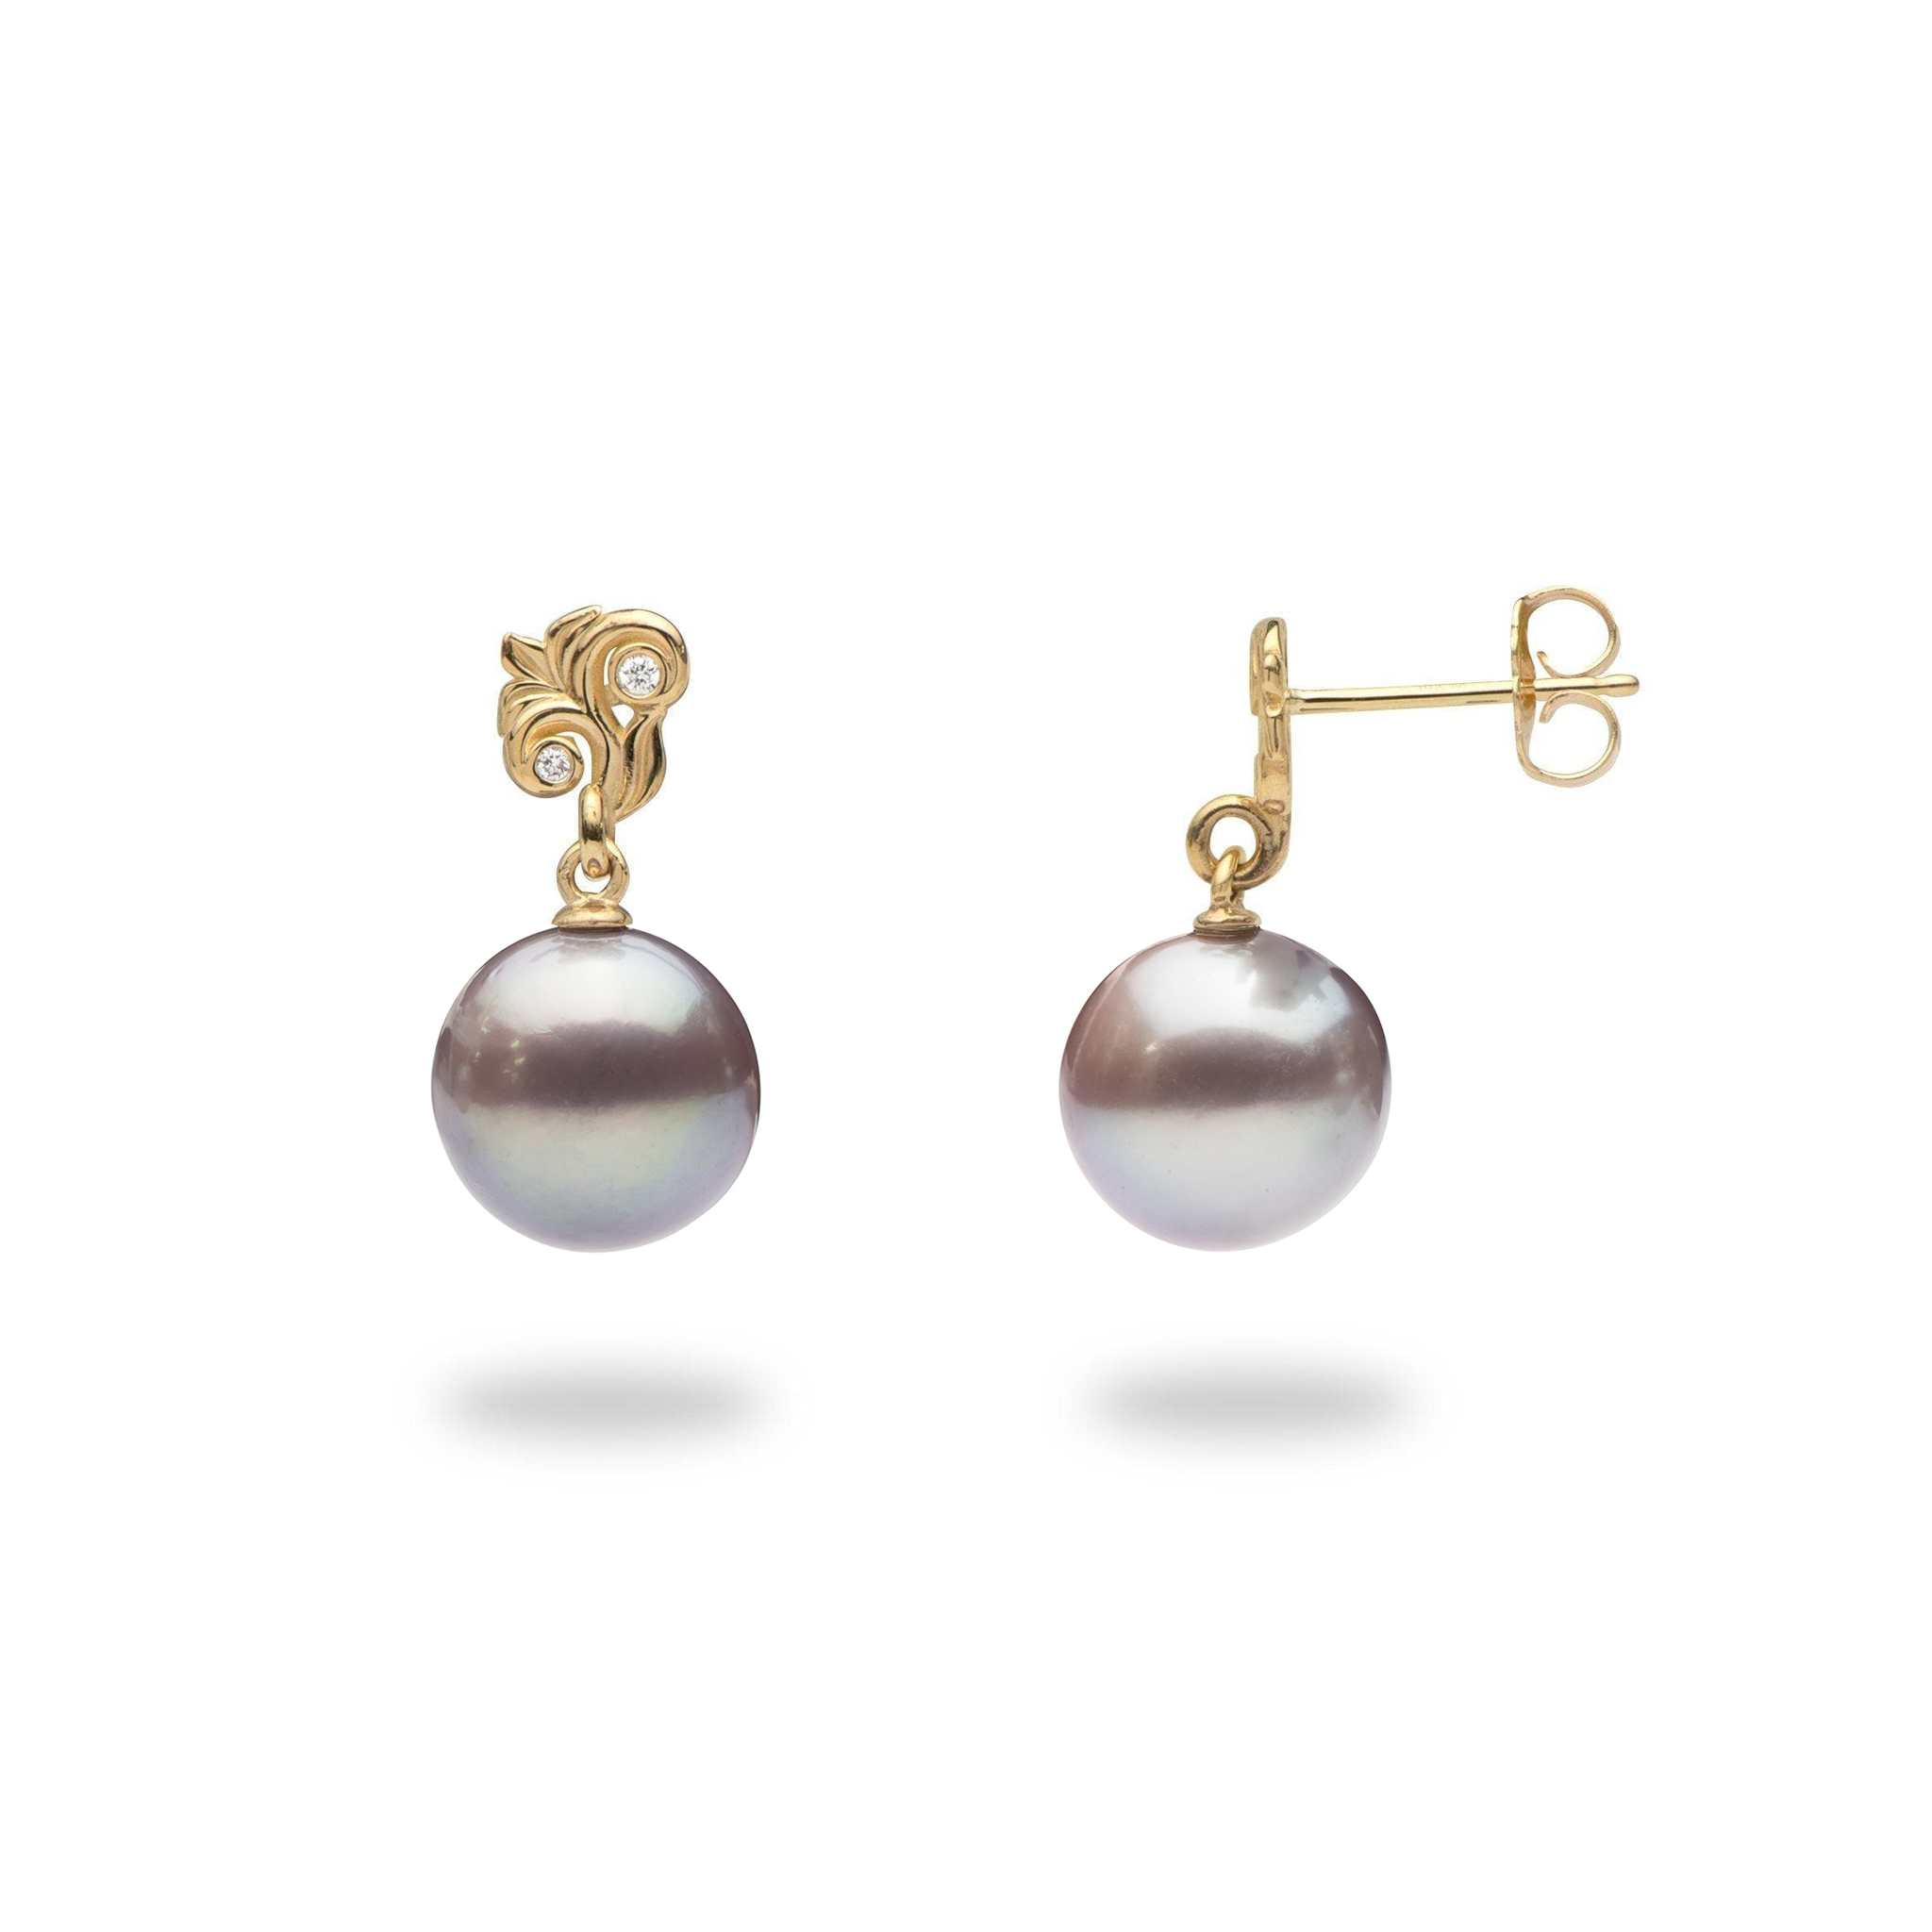 Living Heirloom Freshwater Pearl Earrings in Gold with Diamonds - 10-11mm